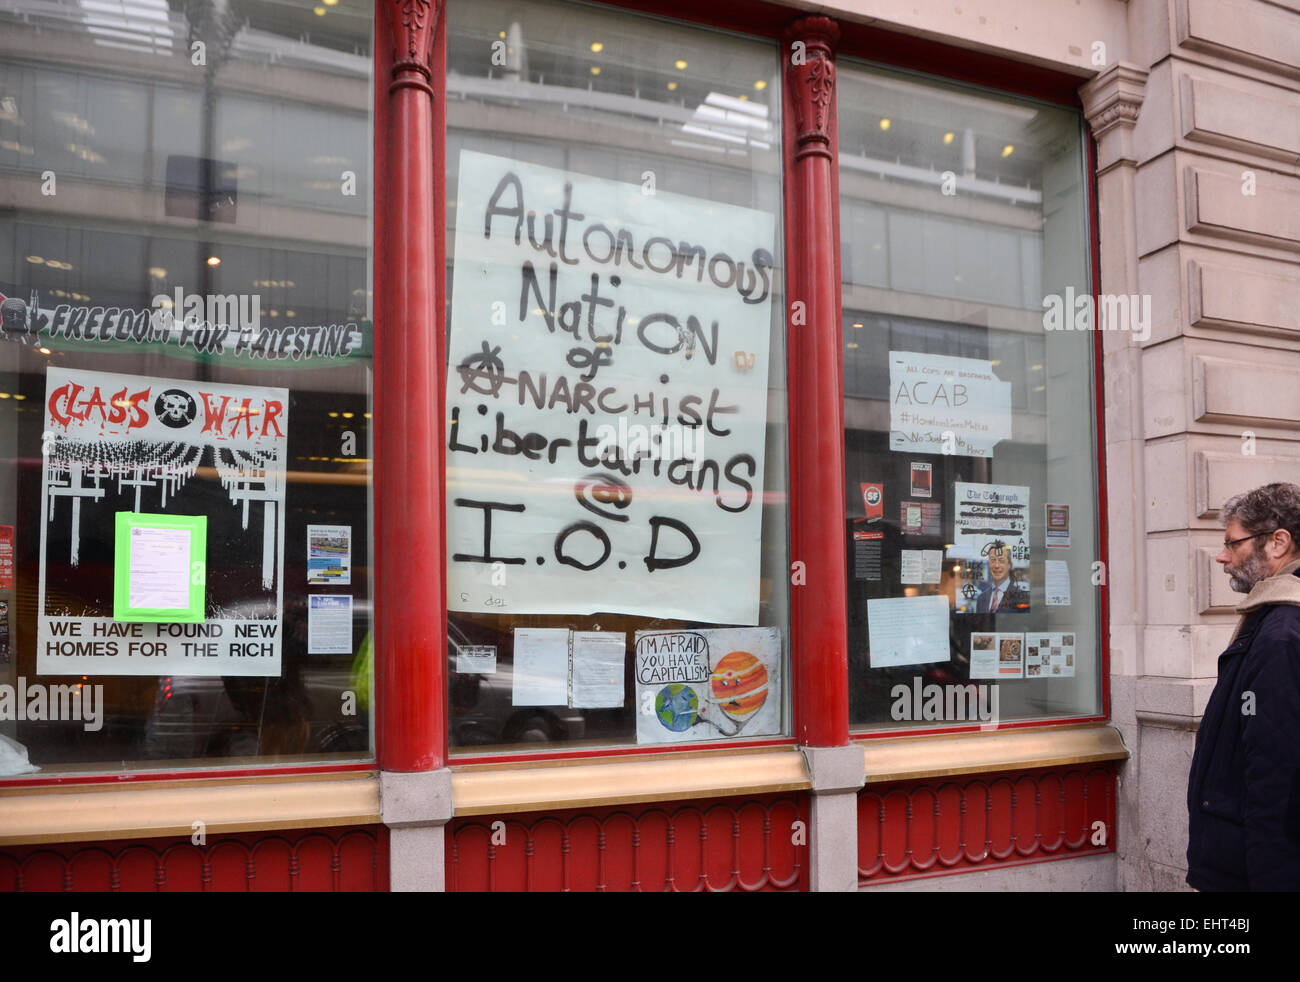 Pall Mall, London, UK. 17th March 2015. An anarchist group calling themselves 'Autonomous Nation of Anarchist Libertarians' is occupying the former HQ of the Institute of Directors on Pall Mall Credit:  Matthew Chattle/Alamy Live News Stock Photo